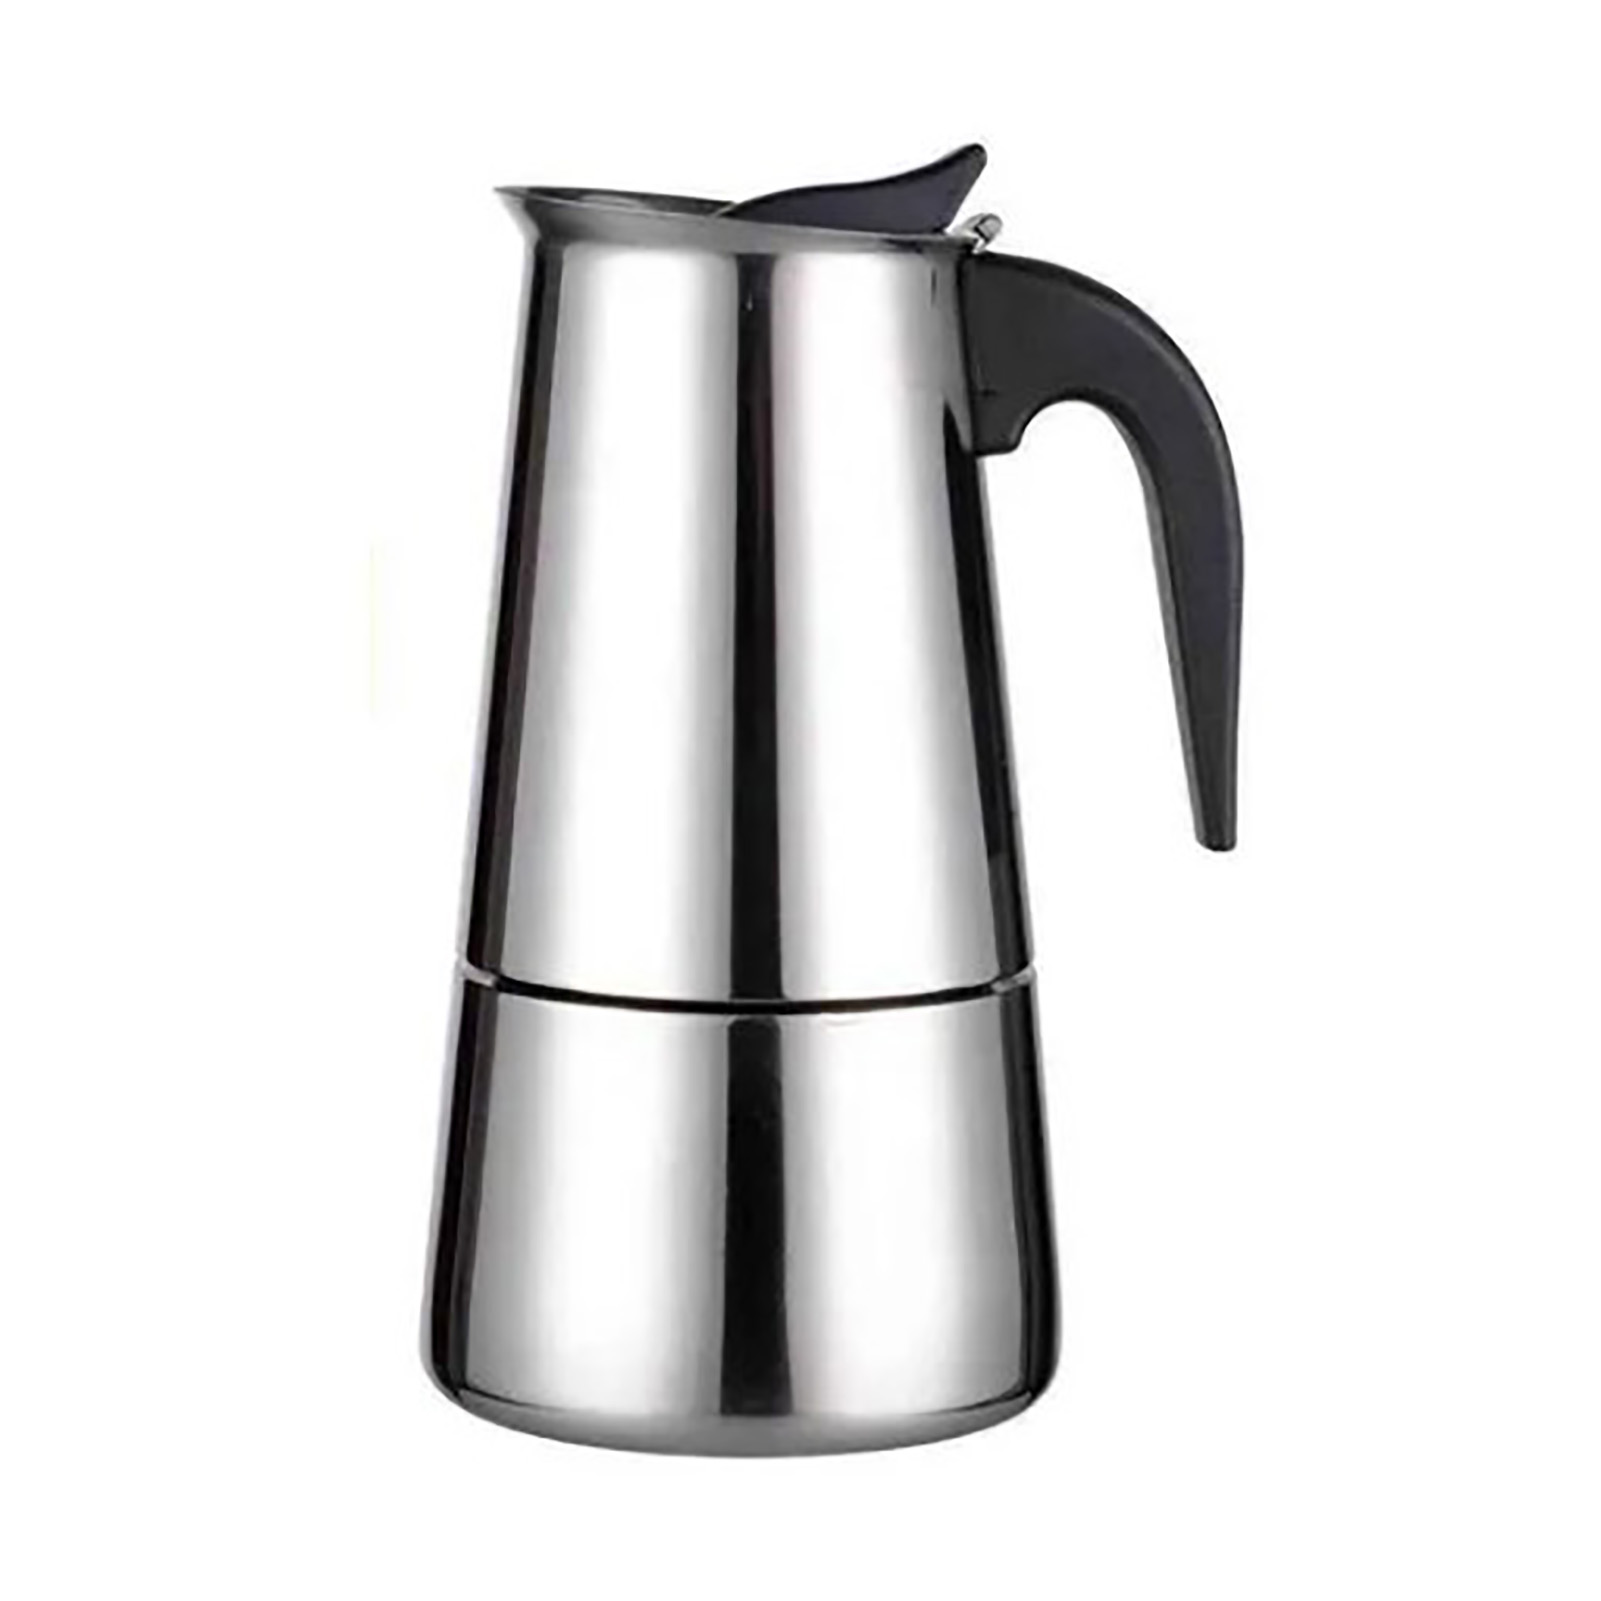 100ML Stainless Steel Coffee Maker Moka Pot Insulated Thermal Coffee ...